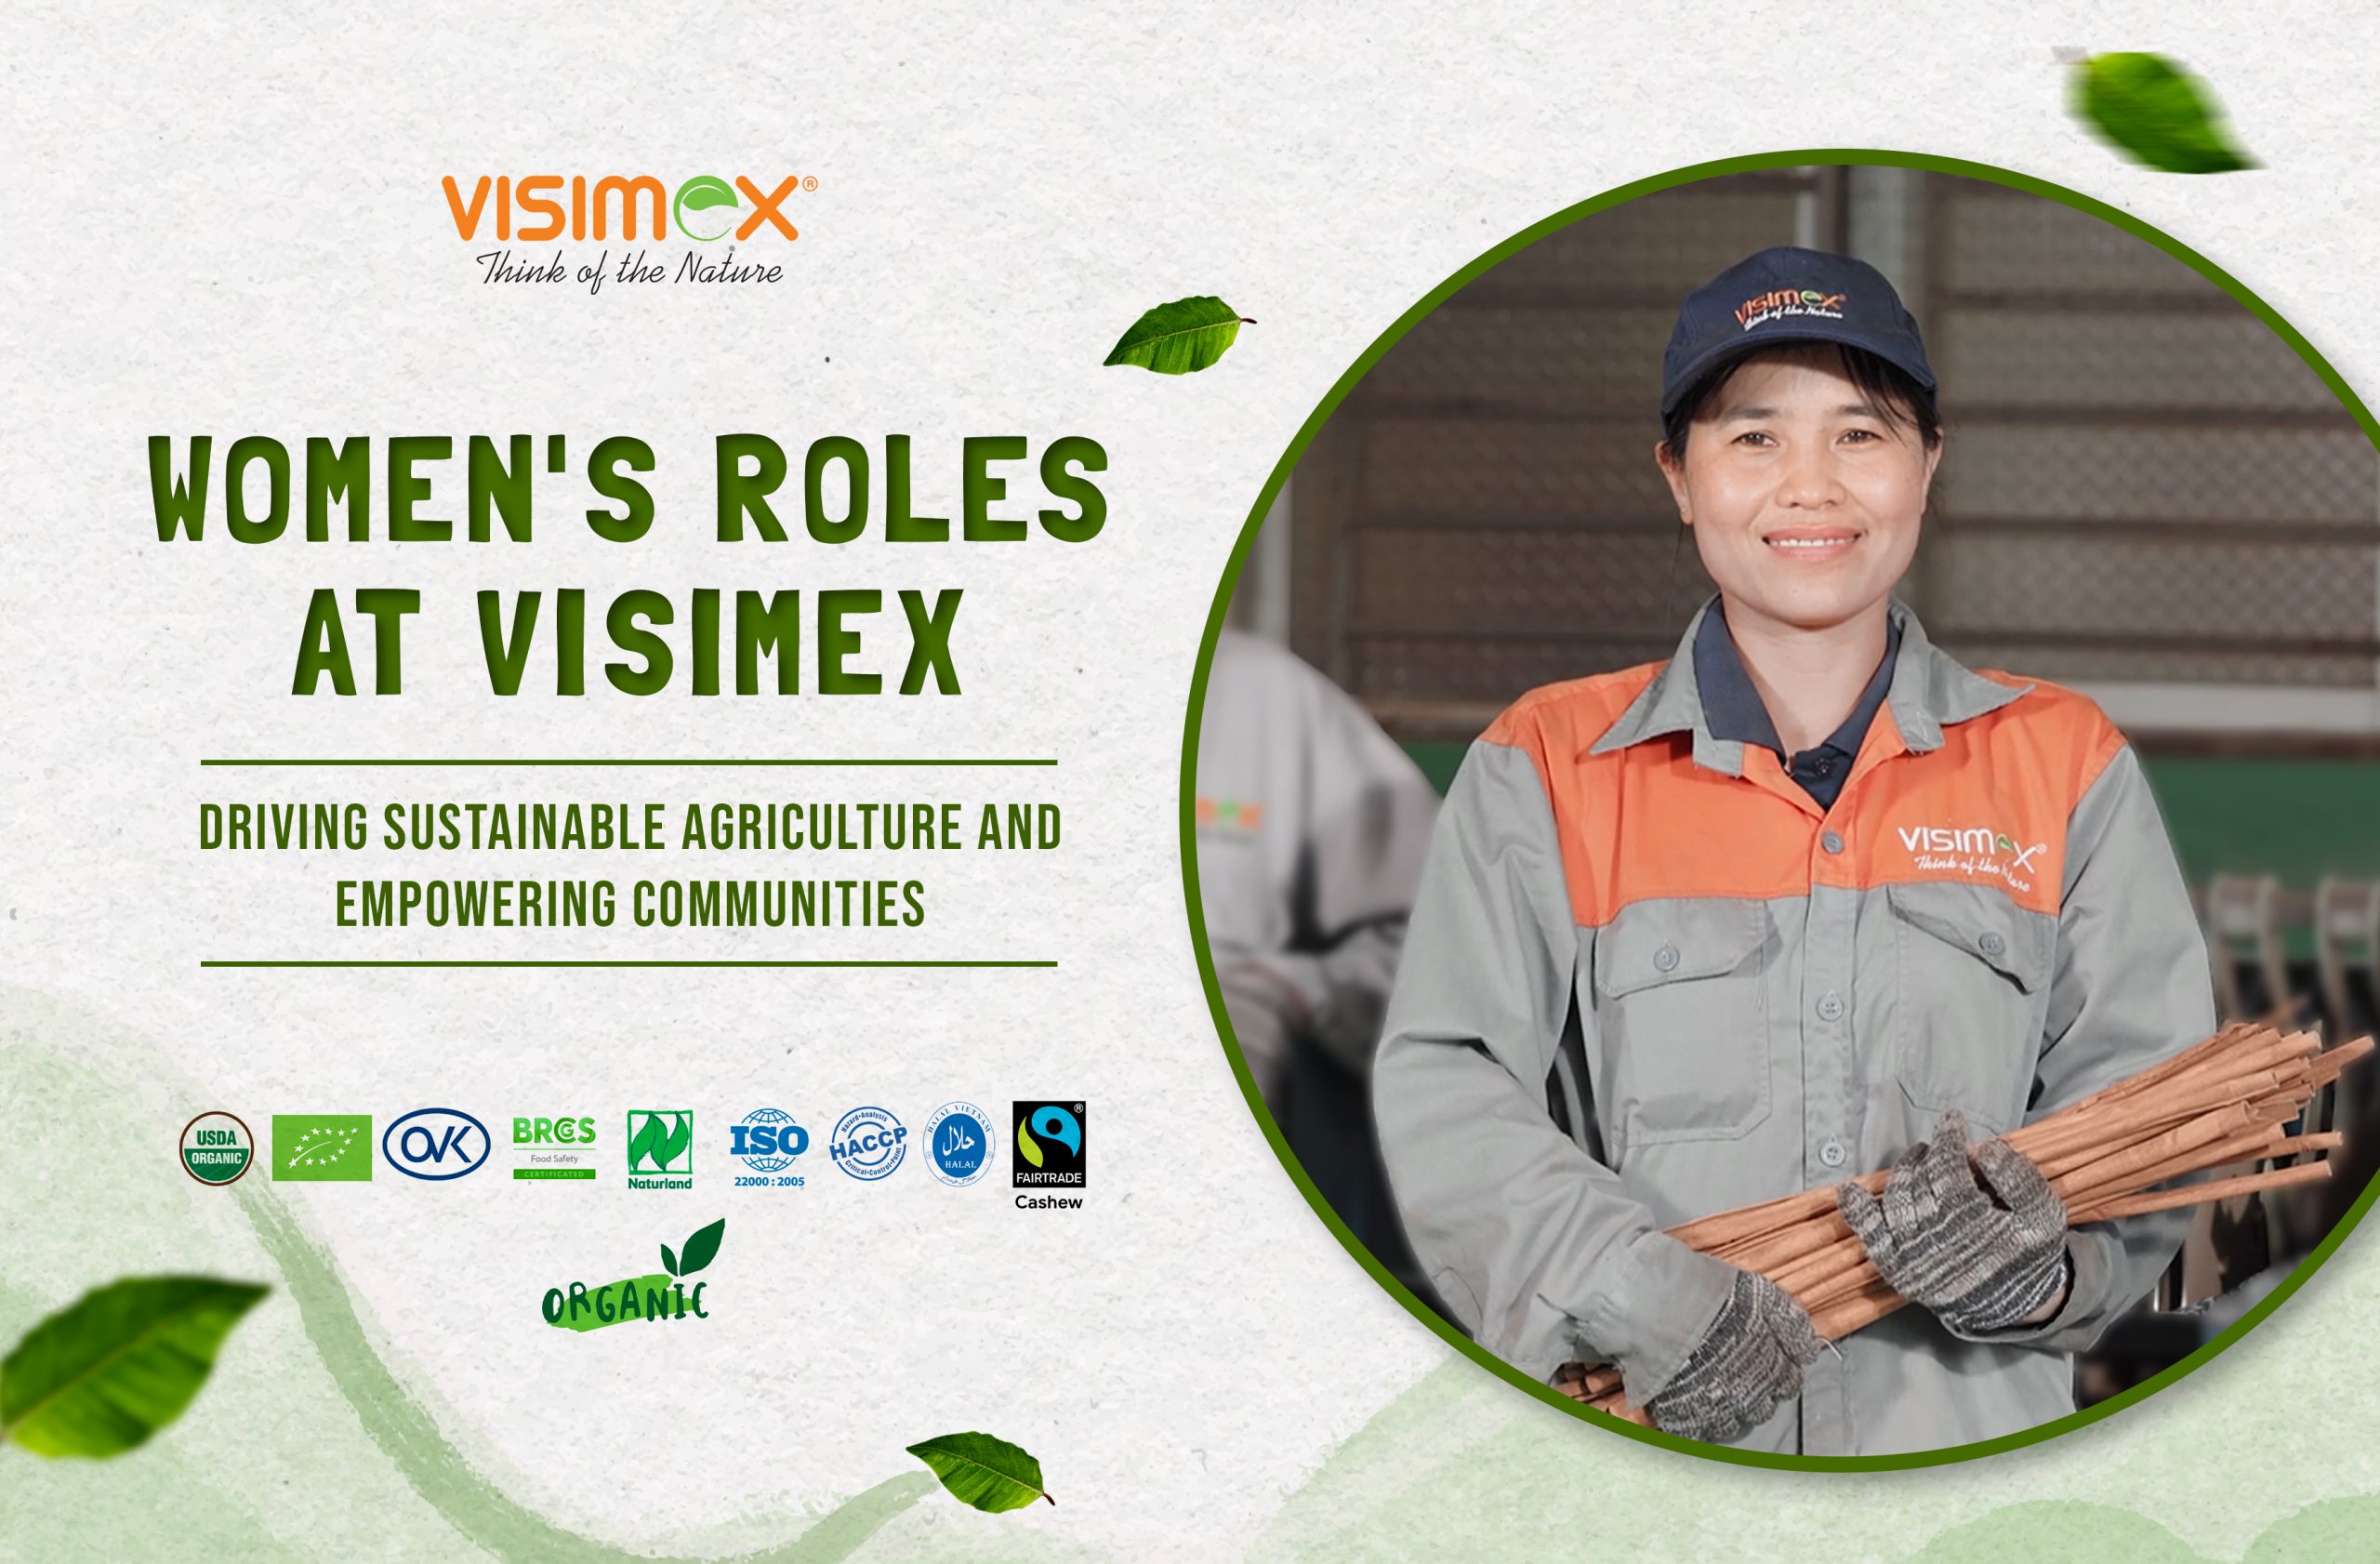 Women's Roles at Visimex: Driving Sustainable Agriculture and Empowering Communities